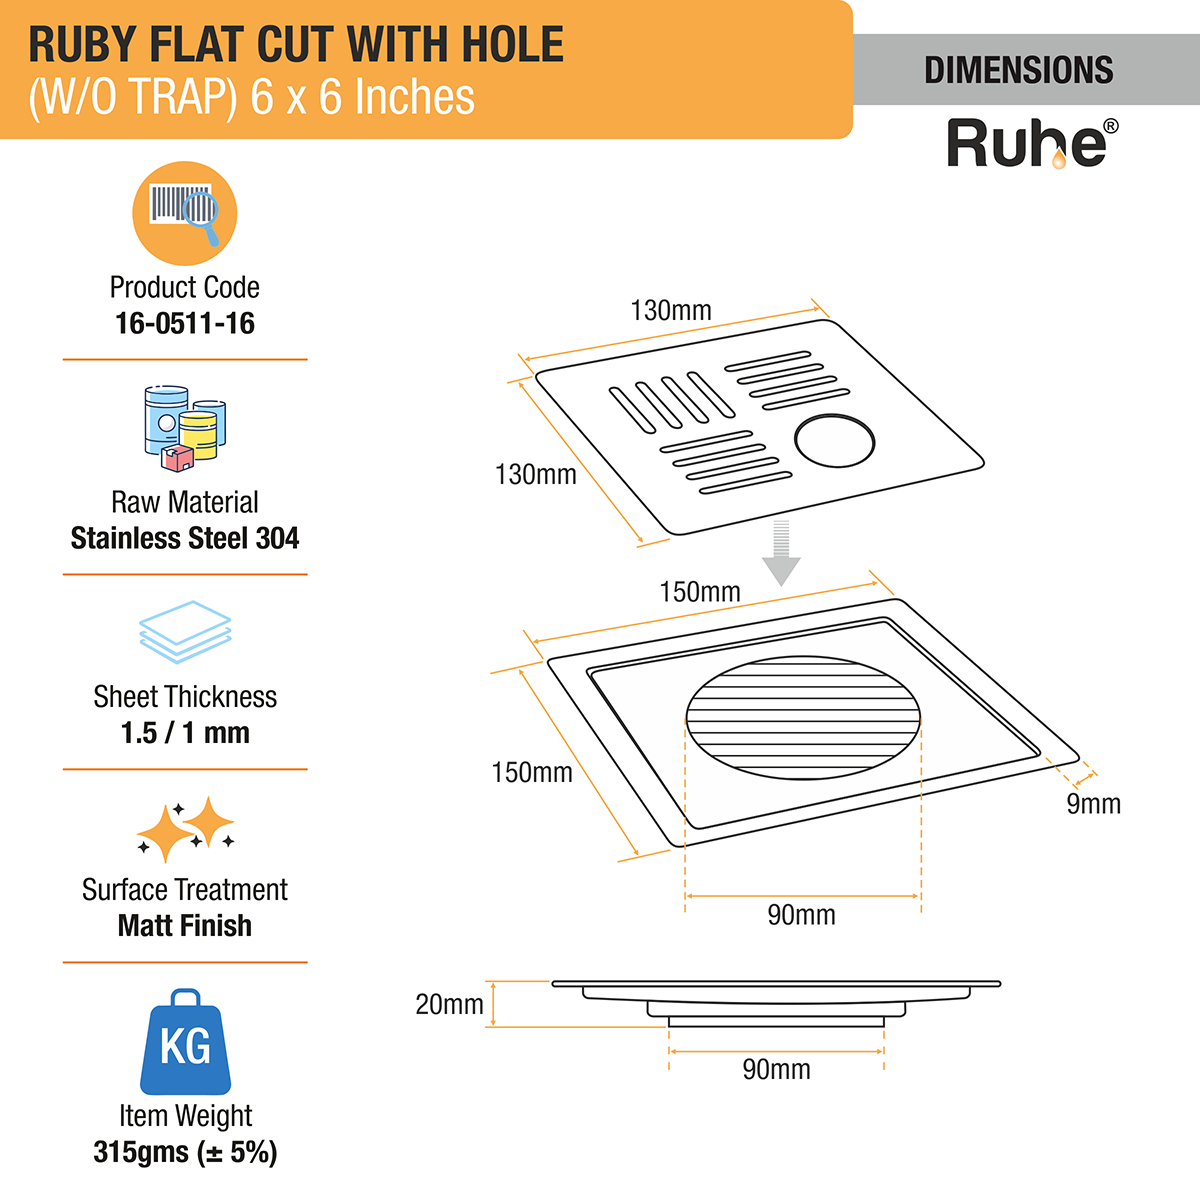 Ruby Square Flat Cut 304-Grade Floor Drain with Hole (6 x 6 Inches) dimensions and sizes